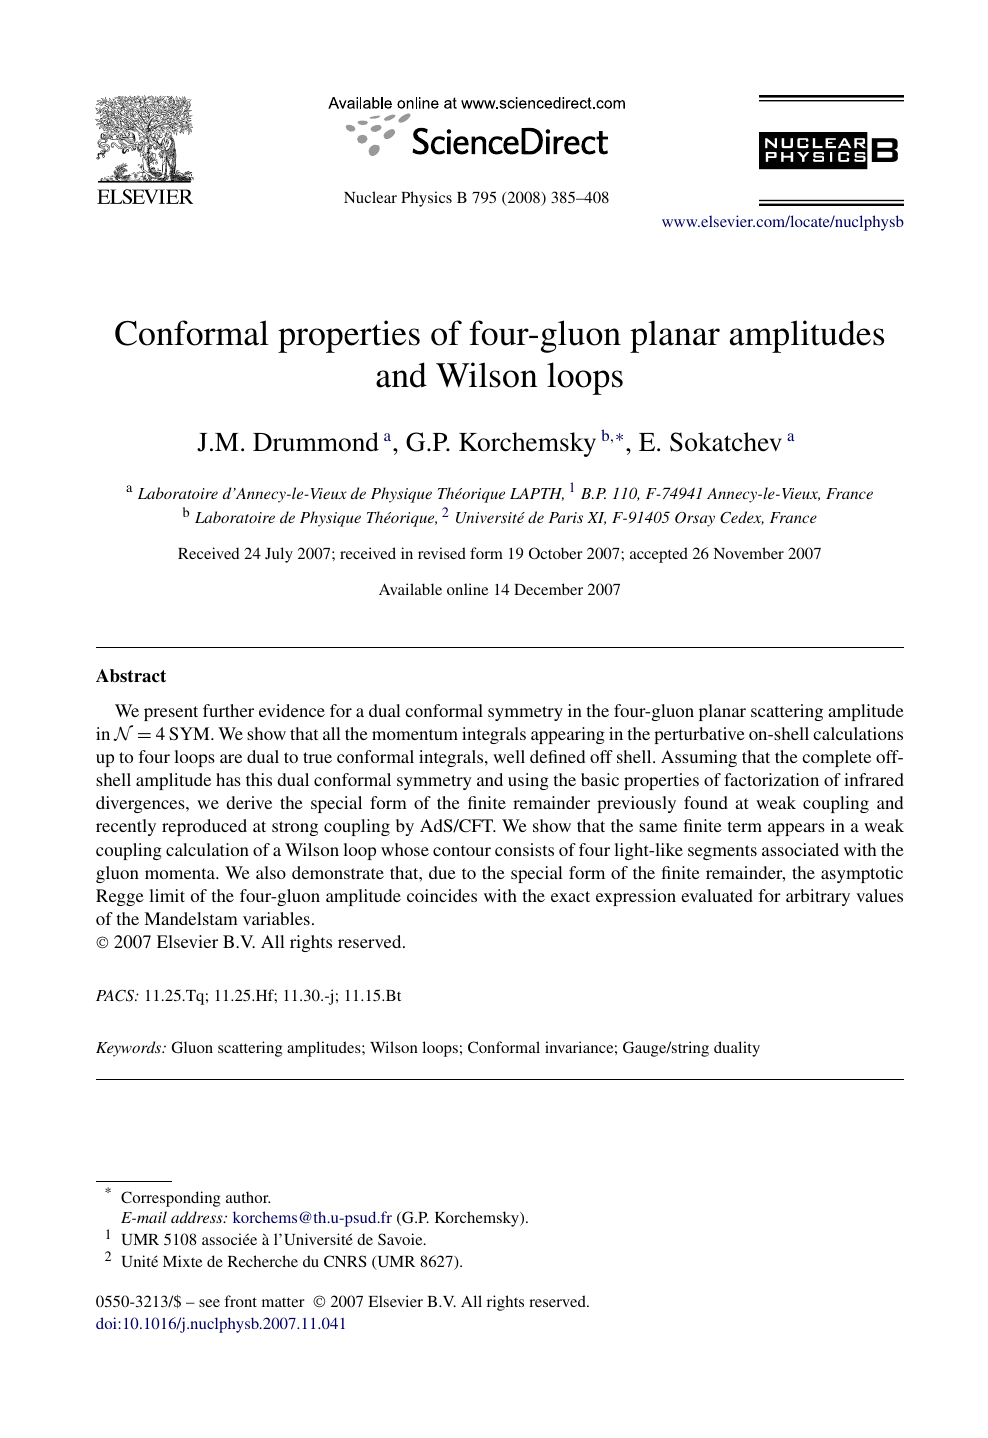 Conformal Properties Of Four Gluon Planar Amplitudes And Wilson Loops Topic Of Research Paper In Physical Sciences Download Scholarly Article Pdf And Read For Free On Cyberleninka Open Science Hub